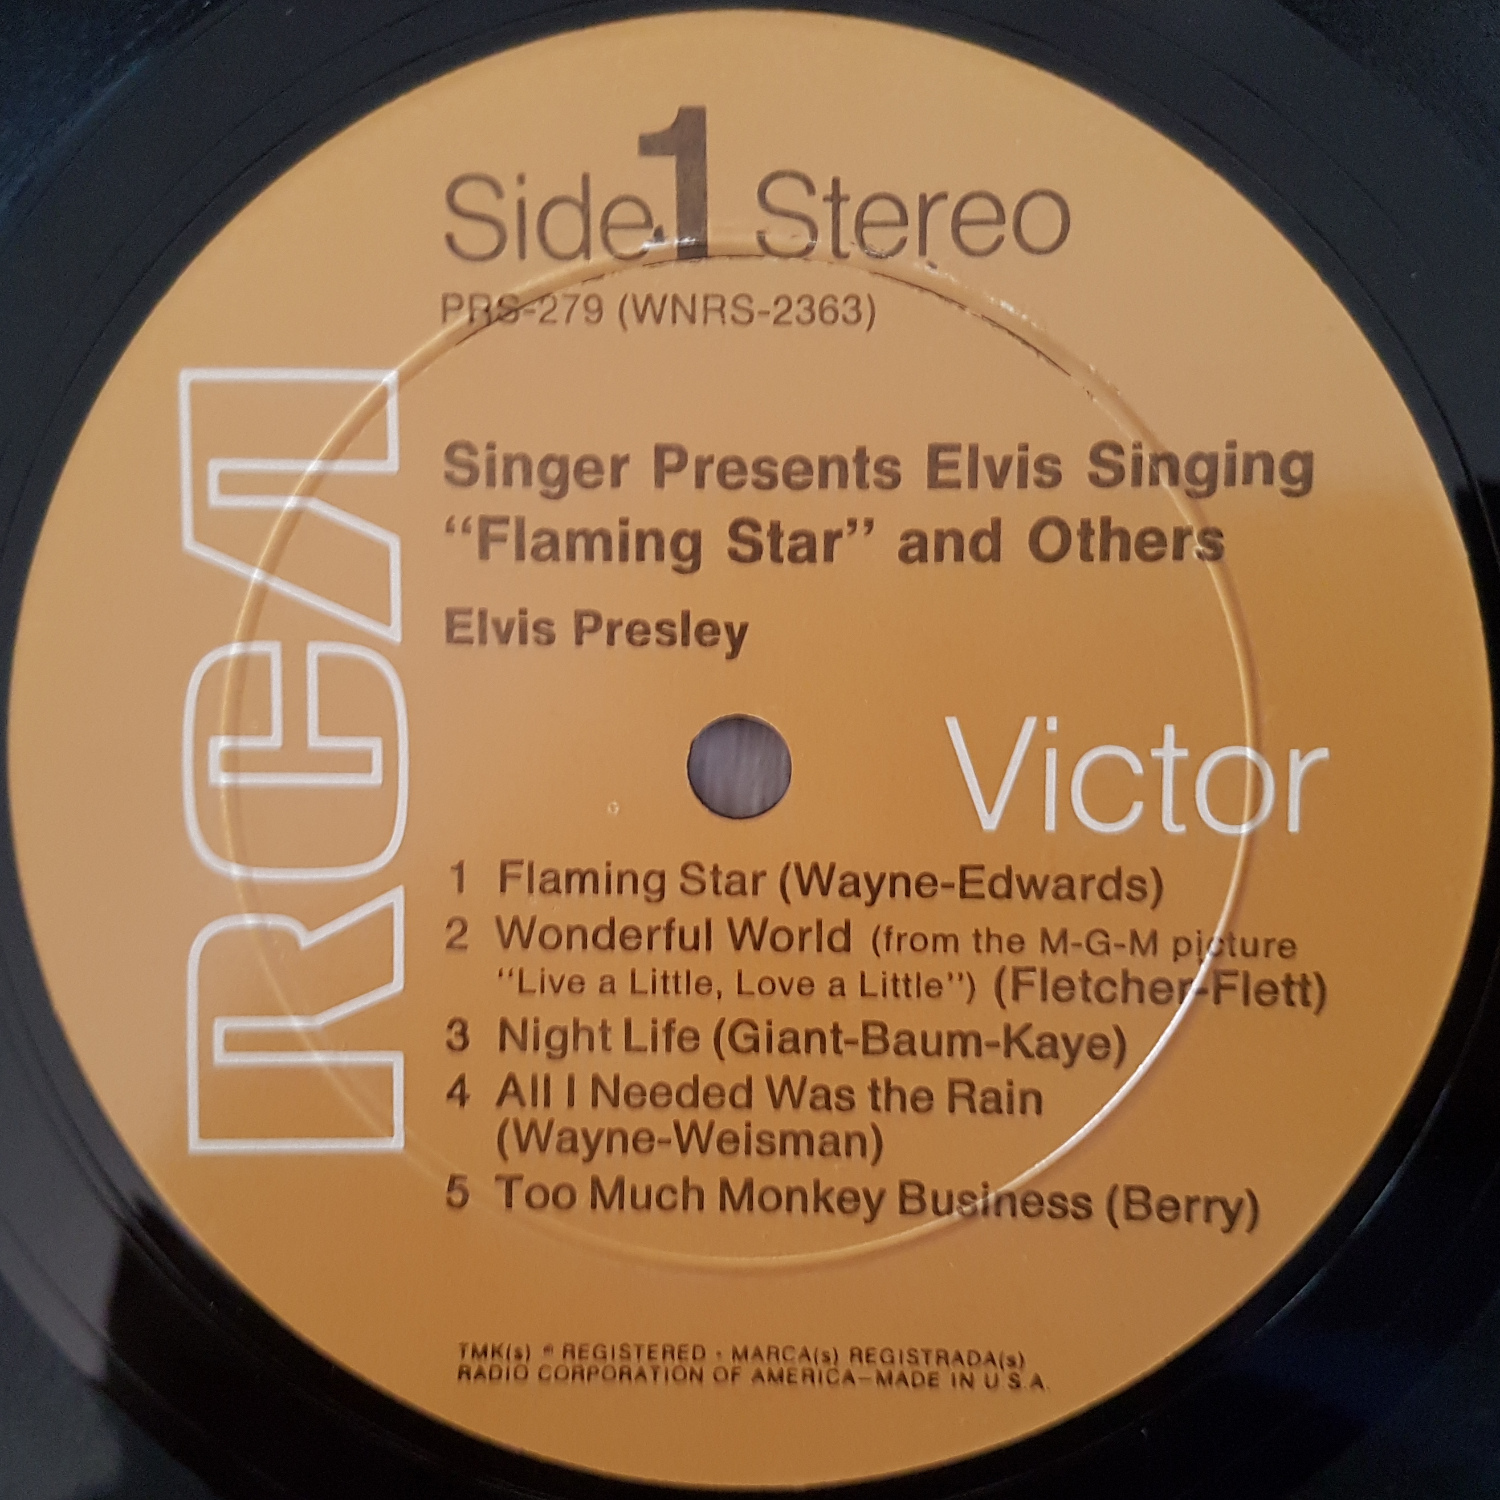 SINGER PRESENTS ELVIS SINGS FLAMING STAR AND OTHERS Prs-2795o3kg9